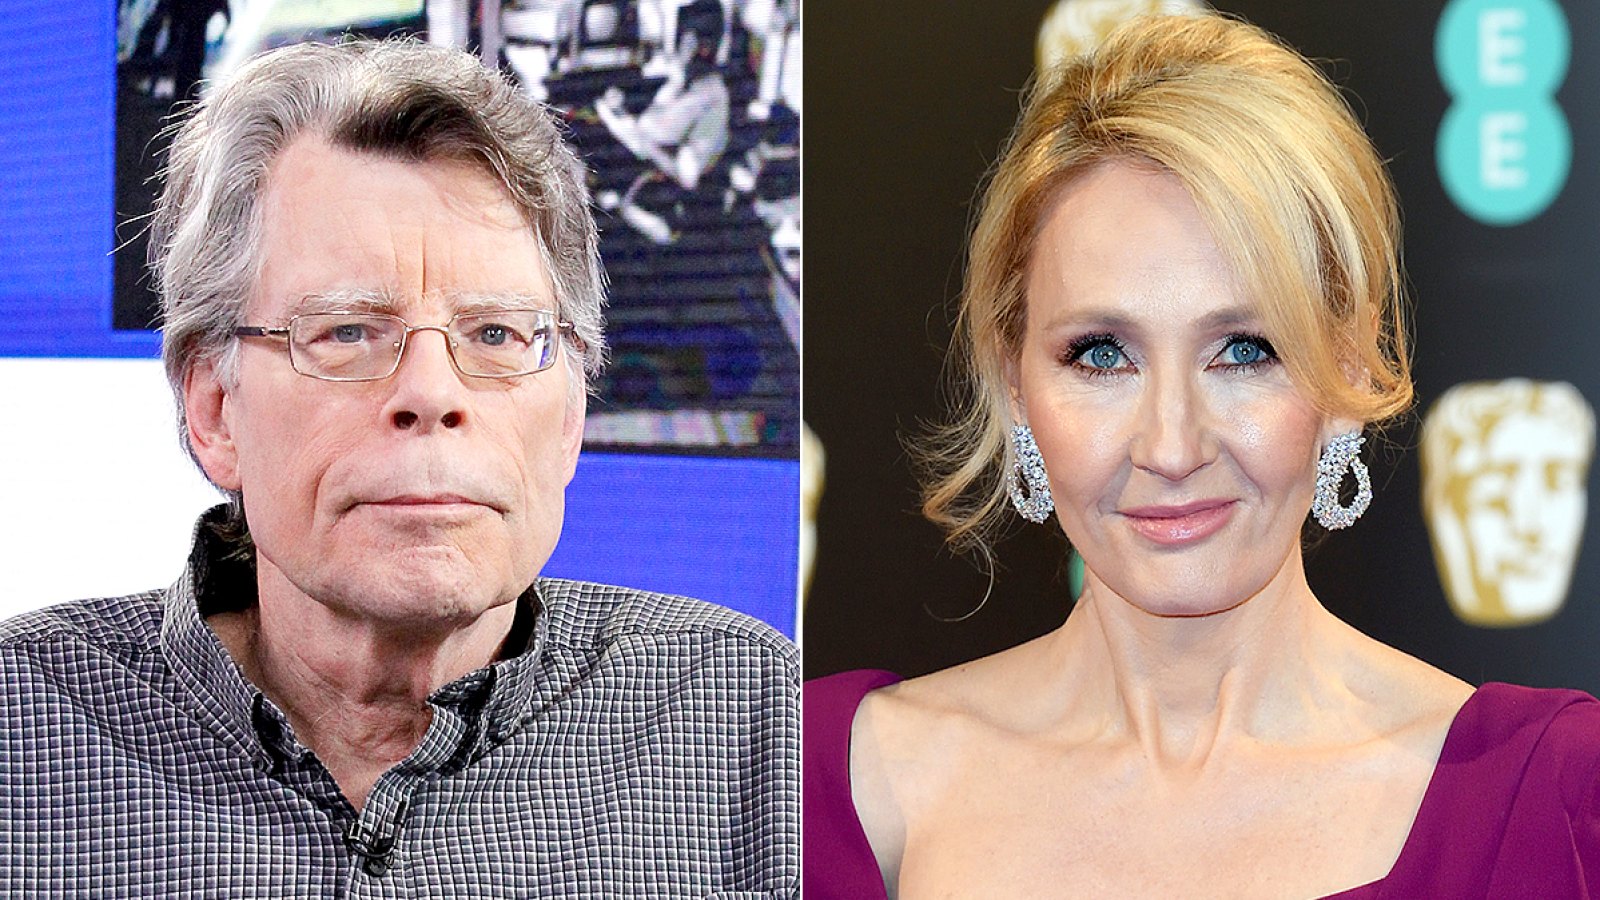 Stephen King and JK Rowling